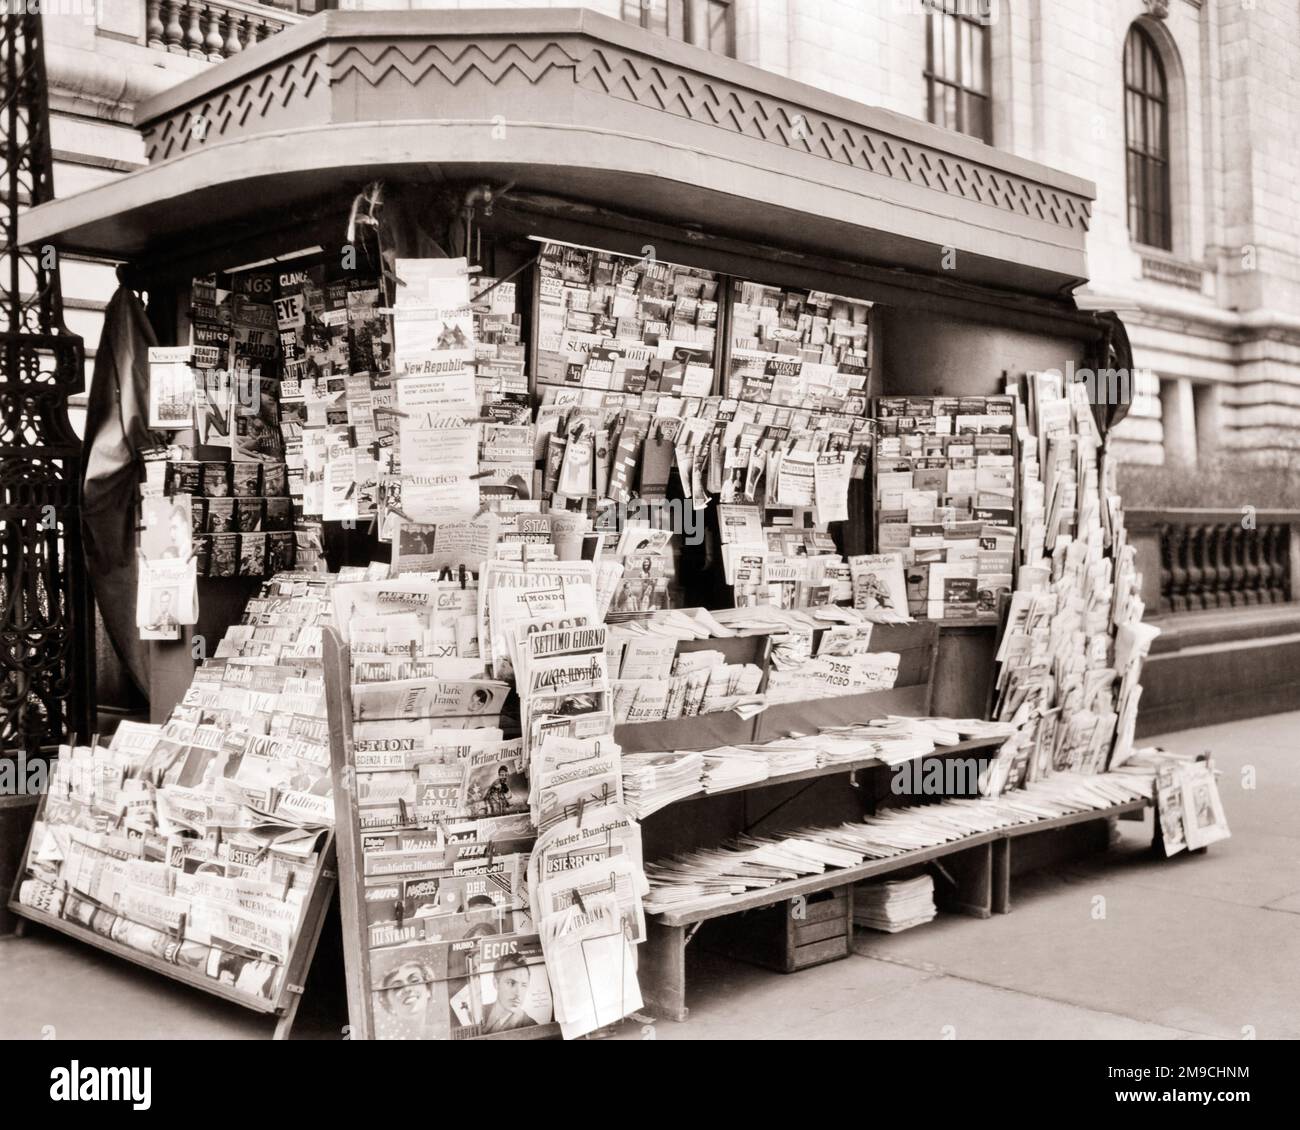 1950s INTERNATIONAL NEWSPAPERS AND MAGAZINES ON SALE AT SIDEWALK NEWSSTAND ON 42ND STREET AND FIFTH AVENUE NEW YORK CITY NY USA - r2347 HAR001 HARS EXTERIOR NEWSSTAND DISTRIBUTION LOCAL MAGAZINES NYC OCCUPATIONS CONCEPTUAL NEW YORK SMALL BUSINESS STILL LIFE CITIES MATERIALS VARIETY NEW YORK CITY KIOSK CREATIVITY IDEAS WORLDWIDE 42ND STREET ARRAY BLACK AND WHITE HAR001 INTERNATIONAL OLD FASHIONED PRINTED Stock Photo